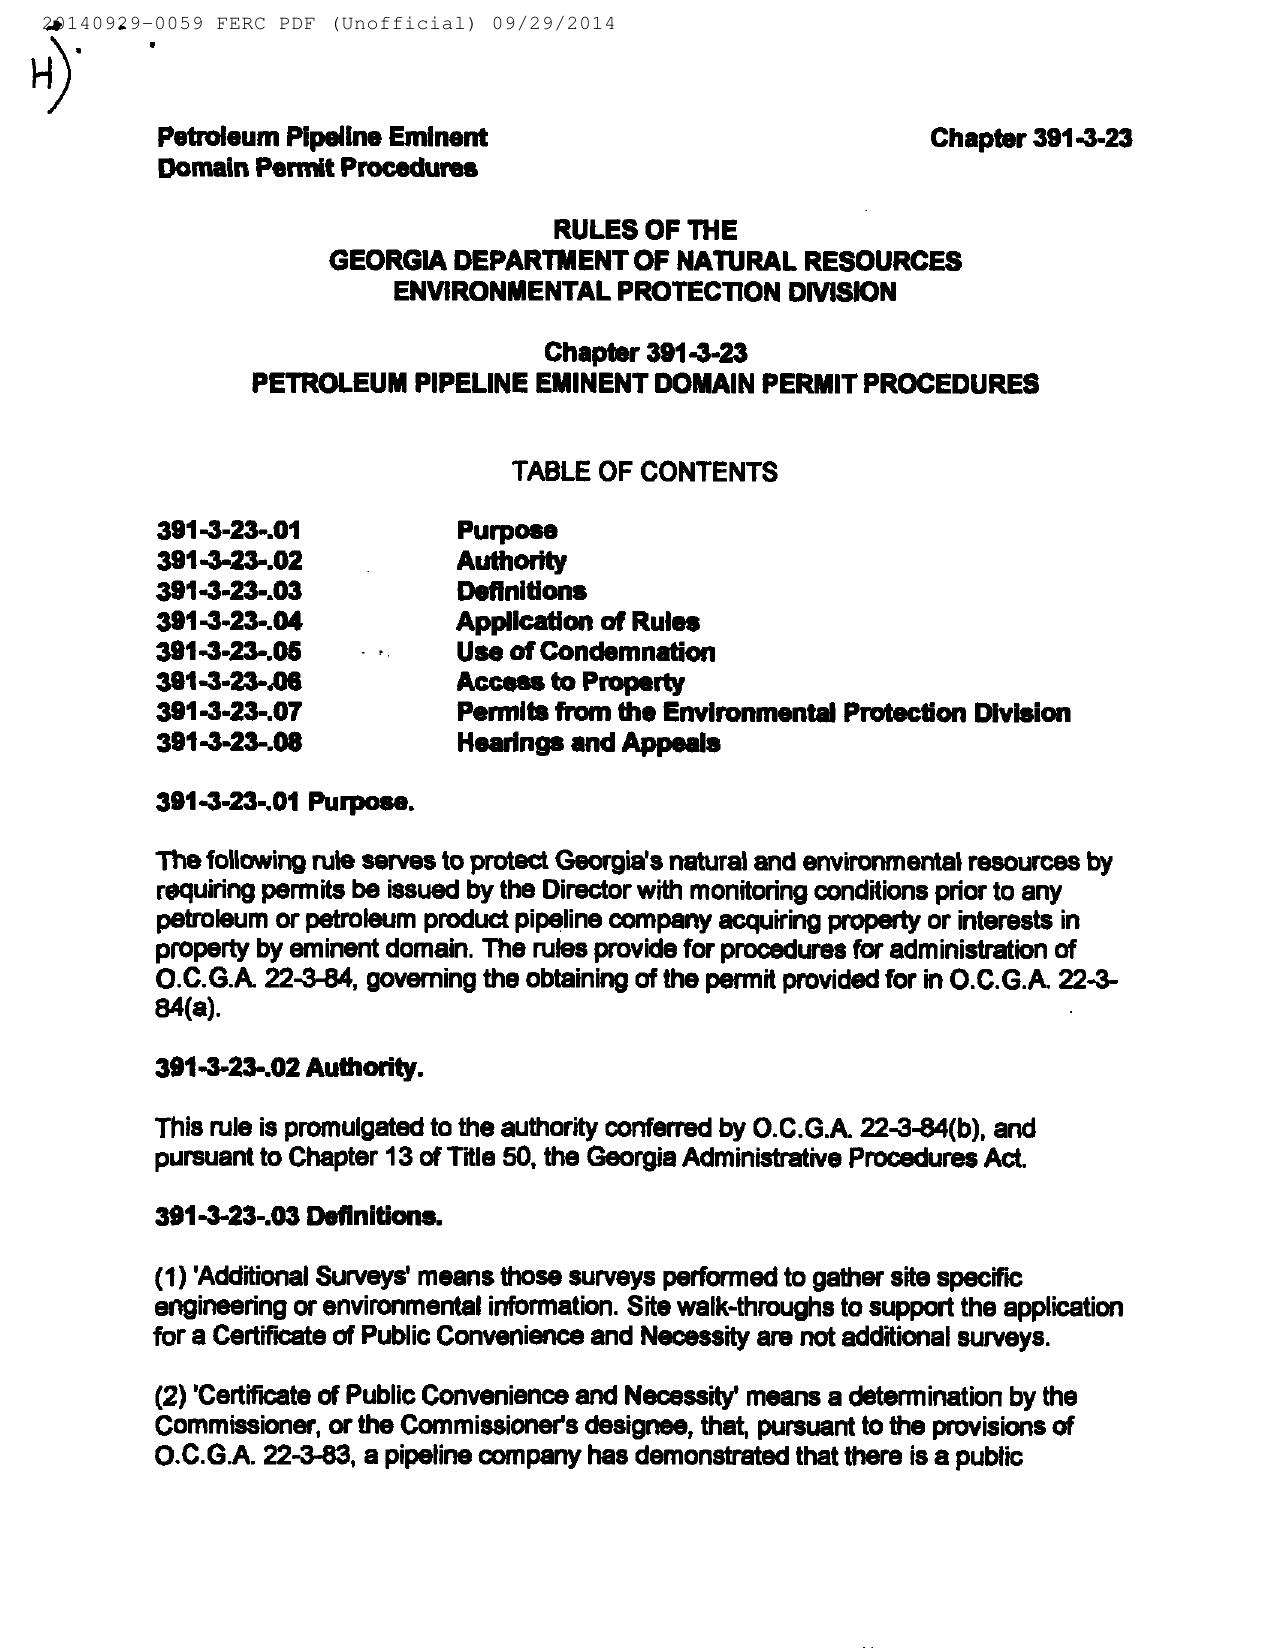 1280x1650 H: GA-EPD Petroleum Pipeline Eminent Domain Permit Procedures (1 of 6), in Resurvey all the properties, by Bill Kendall, for SpectraBusters.org, 29 September 2014